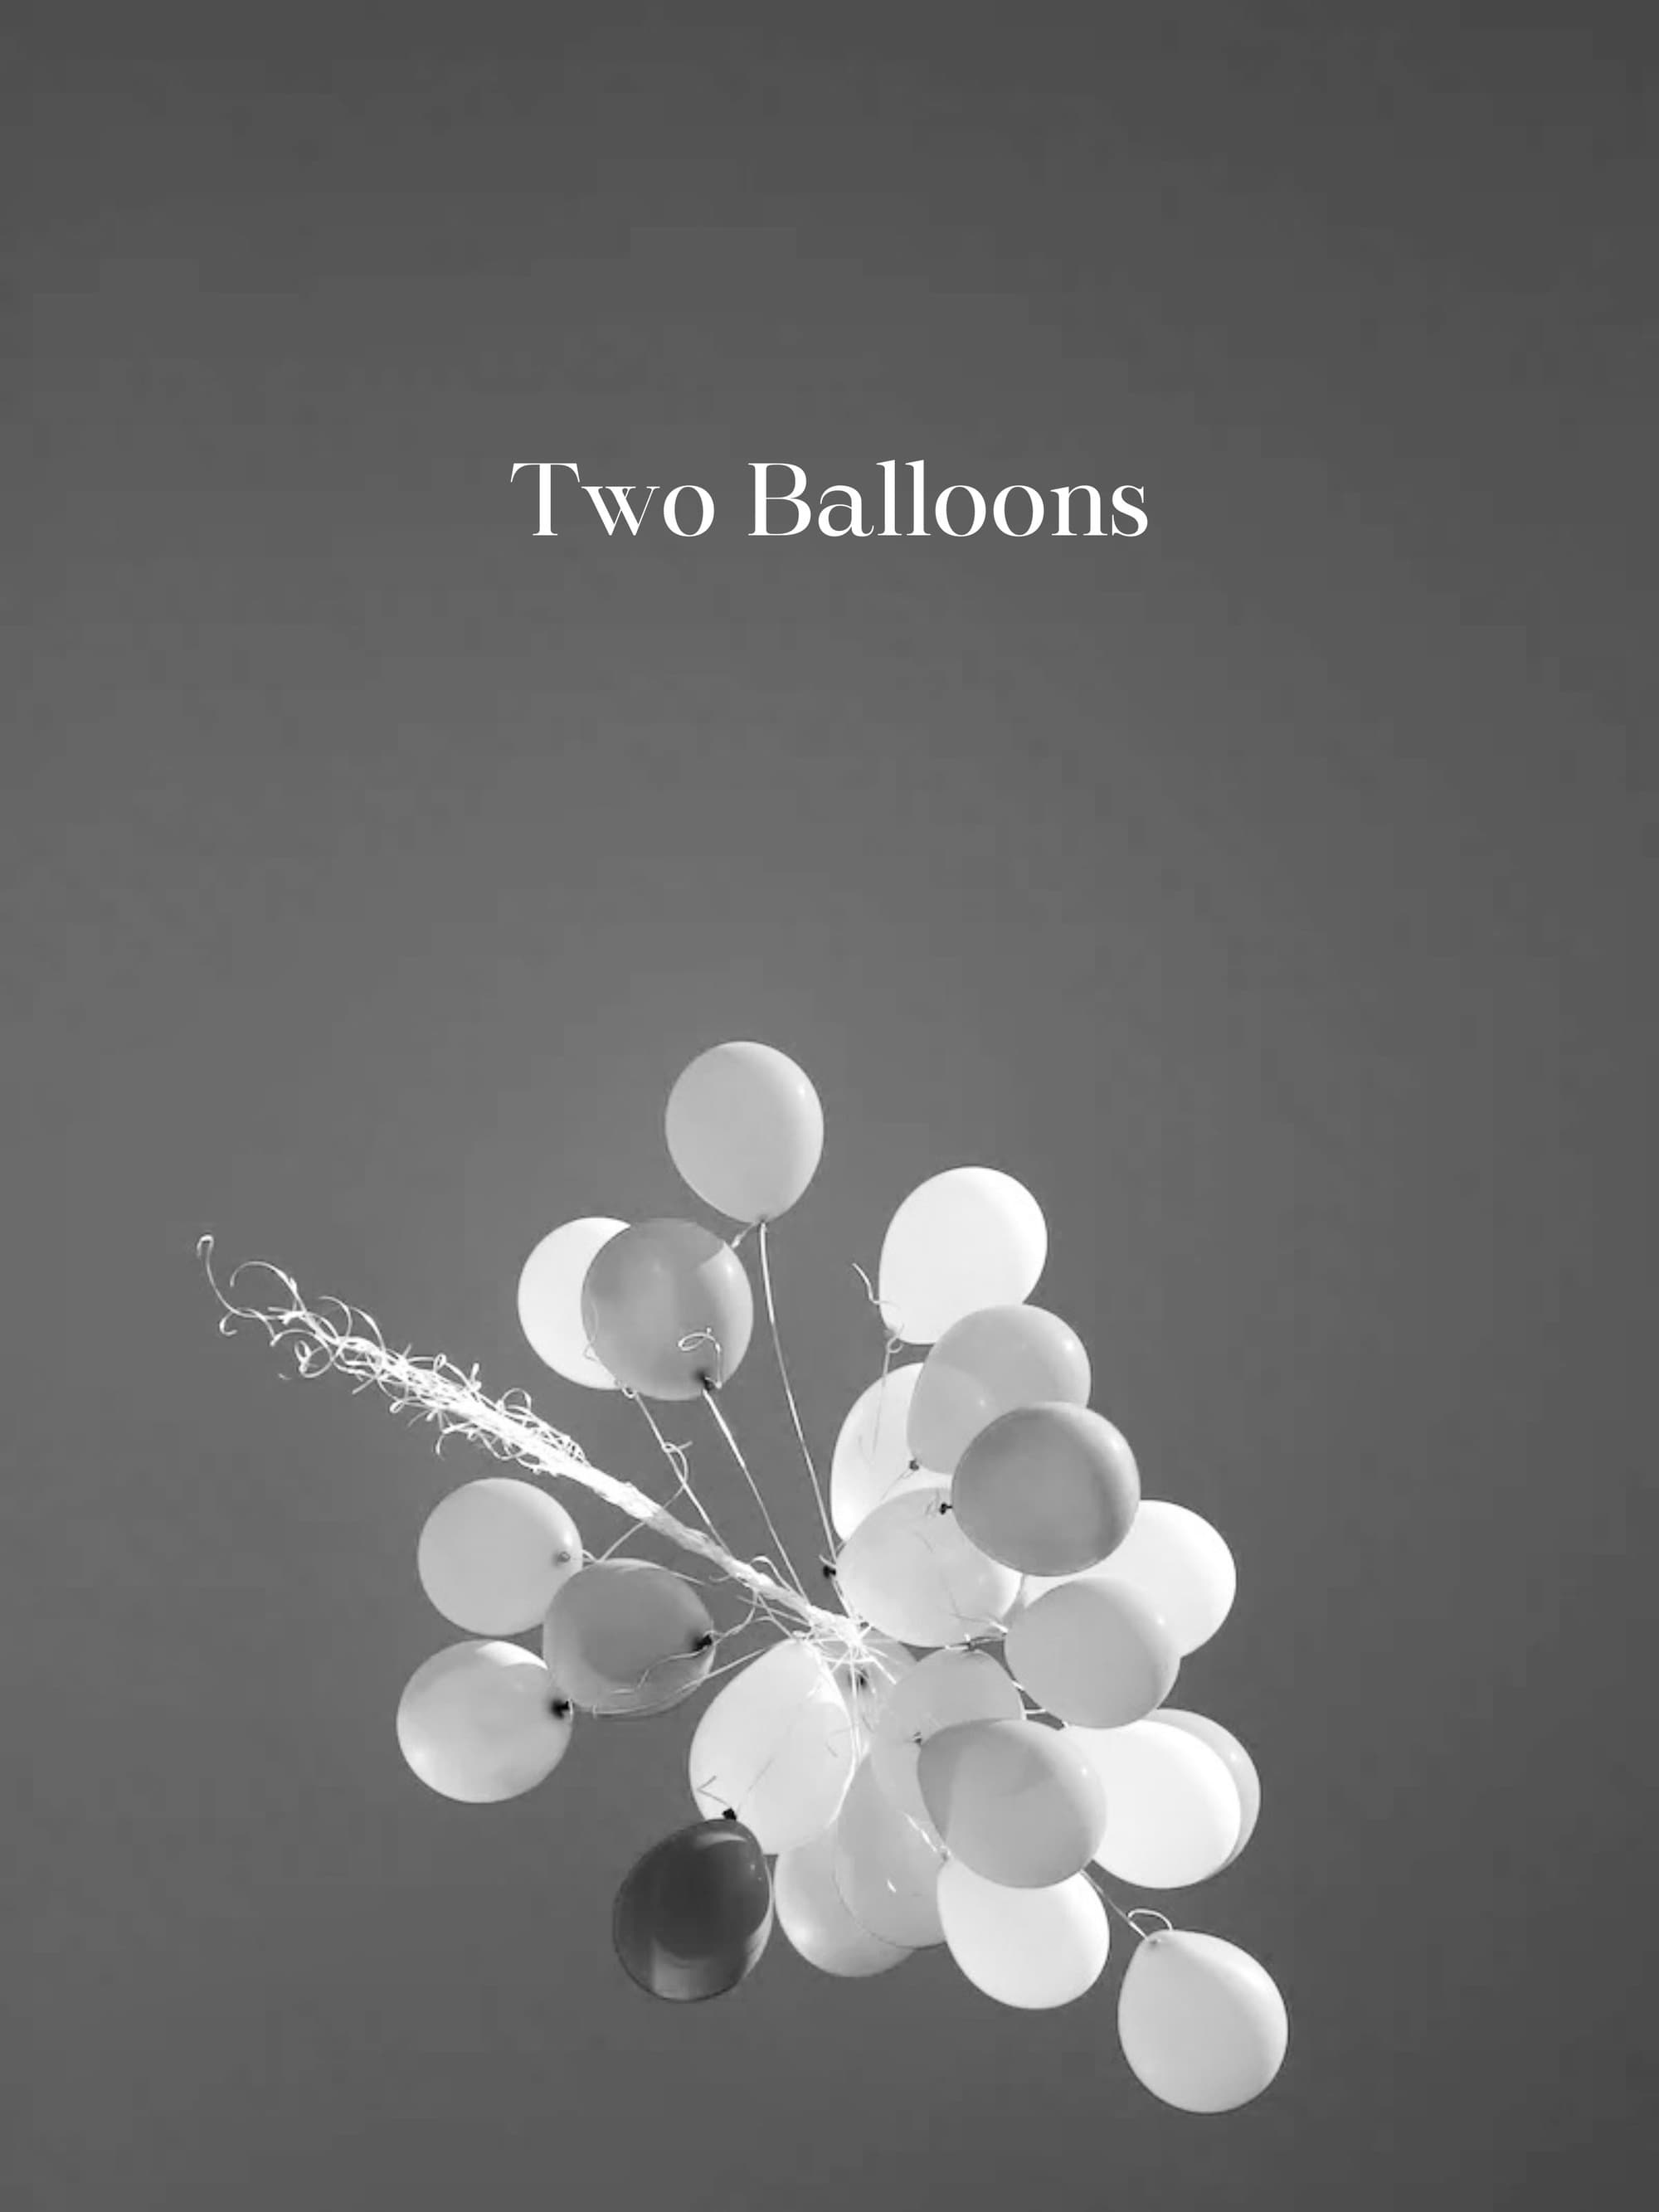 Two Balloons